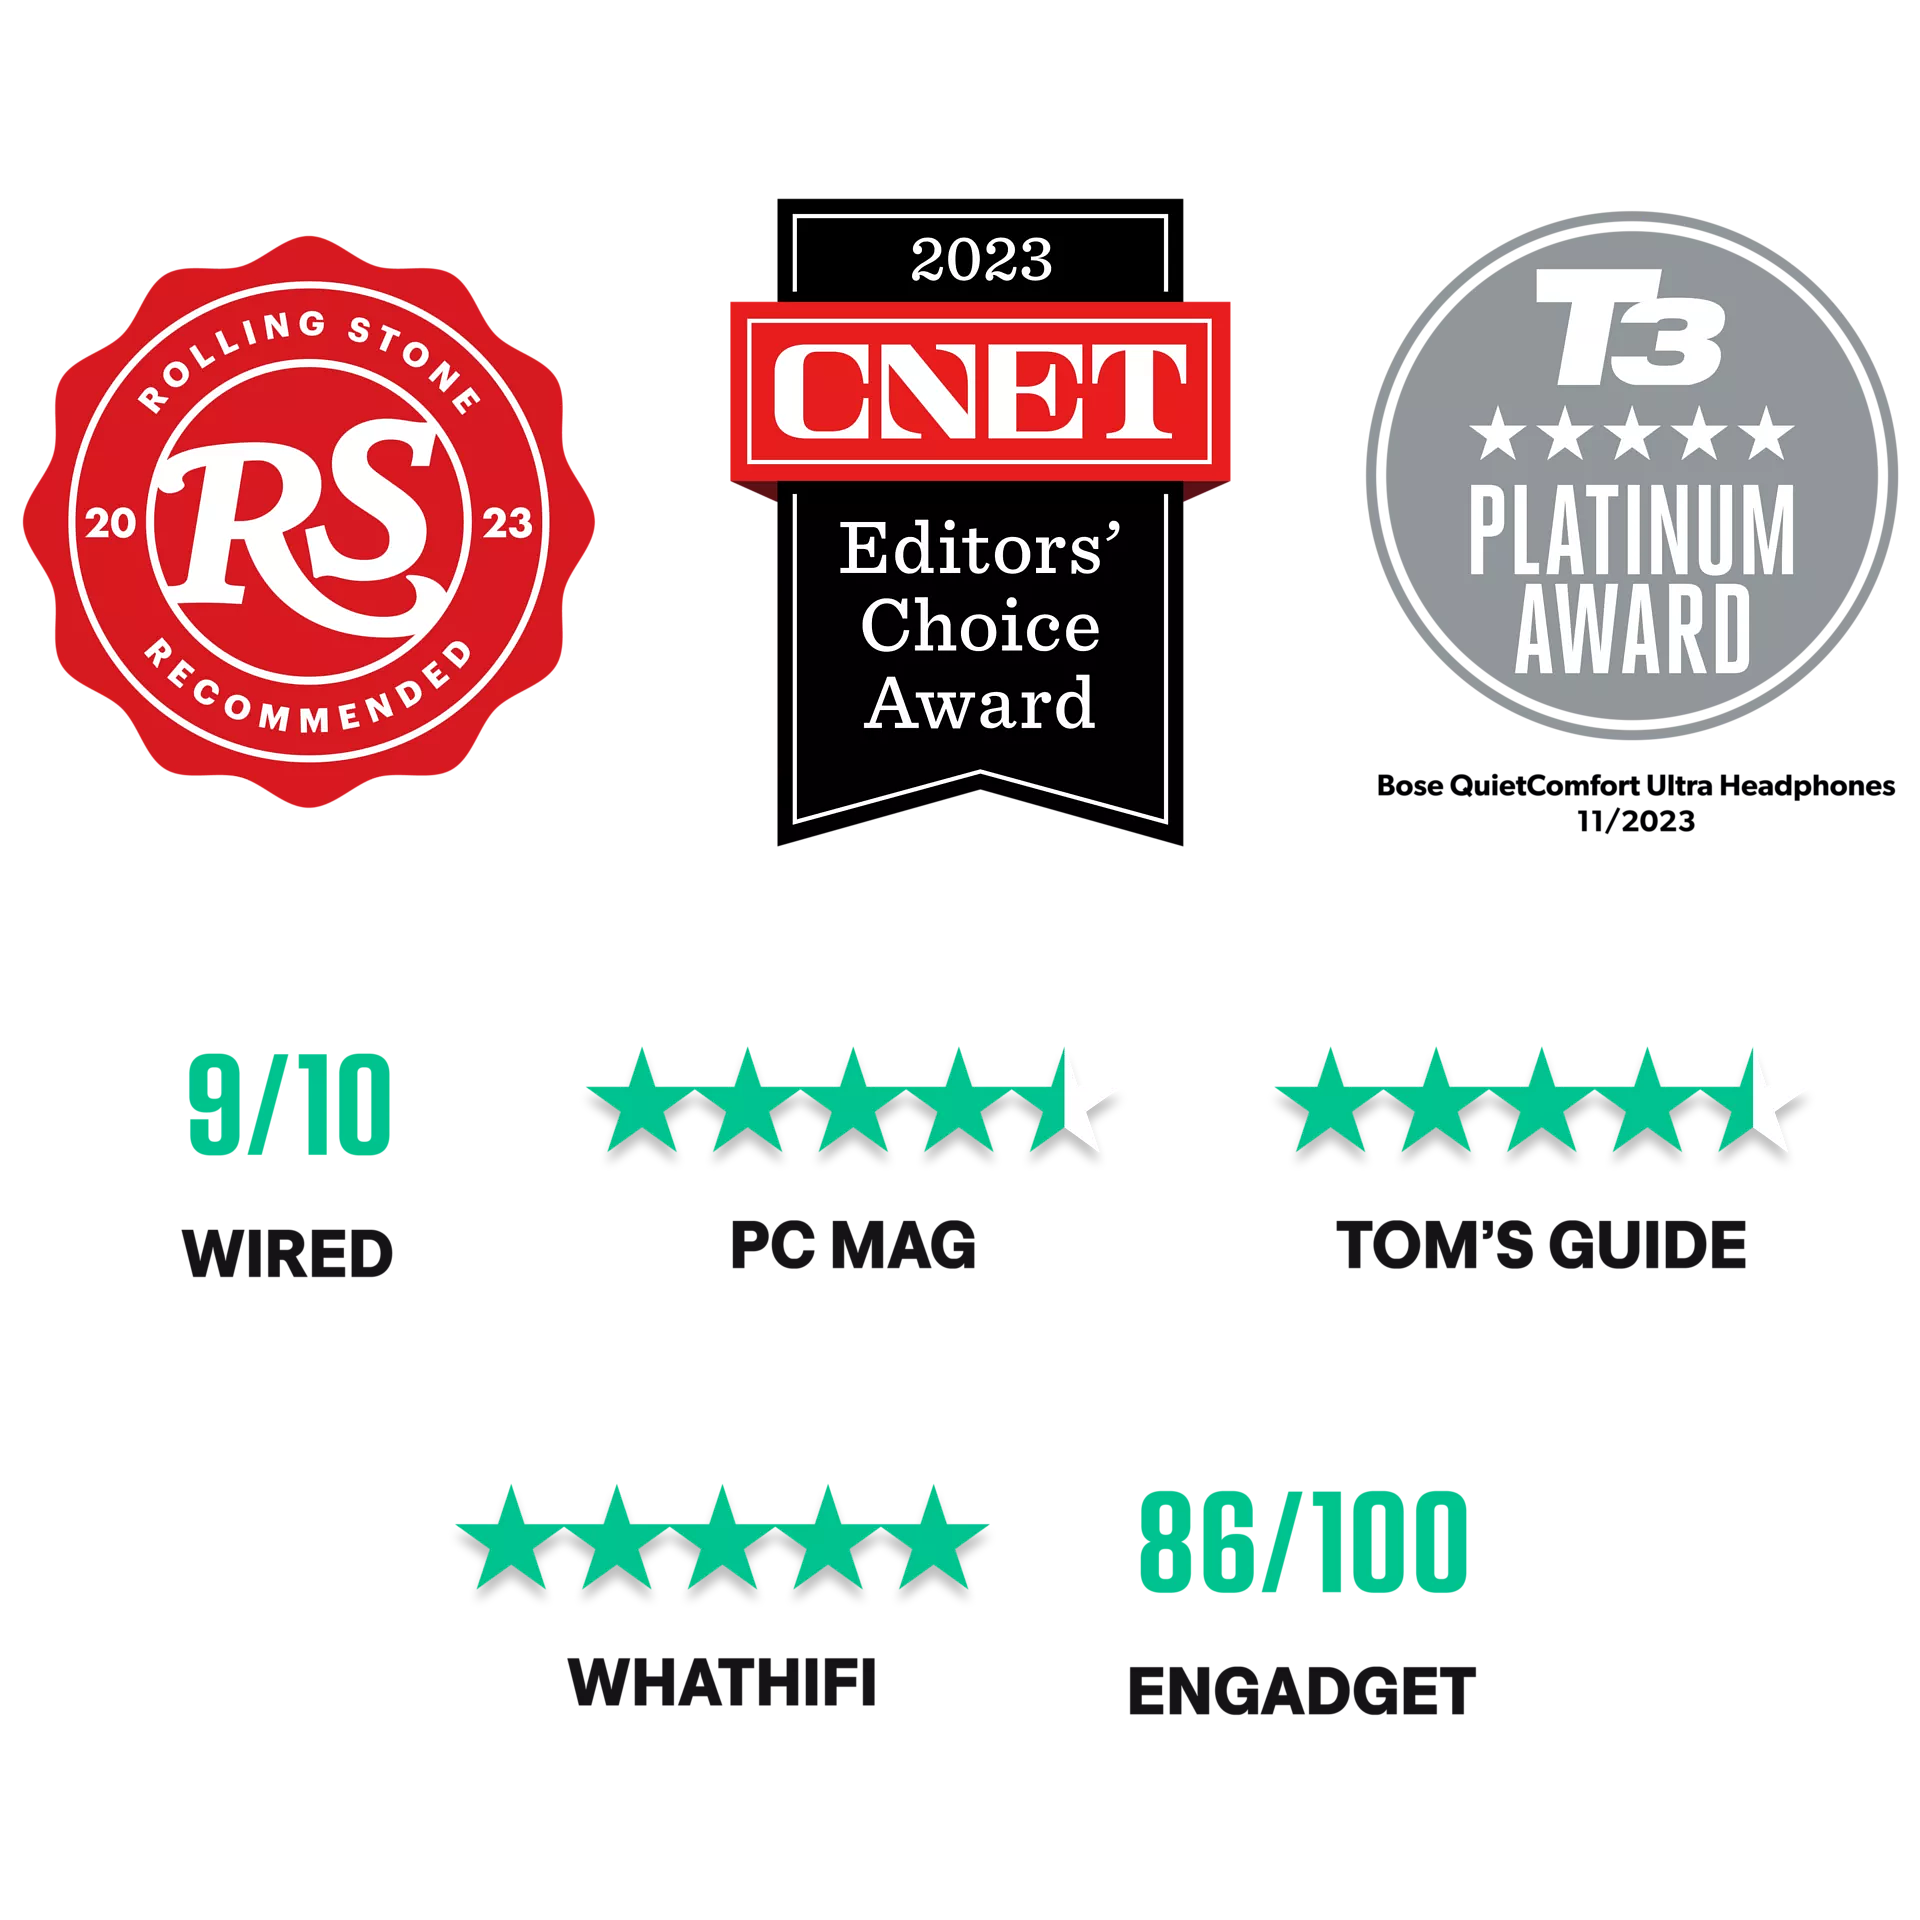 Badge Rolling Stone Recommended 2023, badge CNET Editors’ Choice Award 2023, badge 5 étoiles Platinum Award 11/2023 de T3, note Wired 9/10, note PC Mag 4,5/5 étoiles, note Tom’s Guide 4,5/5 étoiles, note What HiFi 5/5 étoiles, note Engadget 86/100